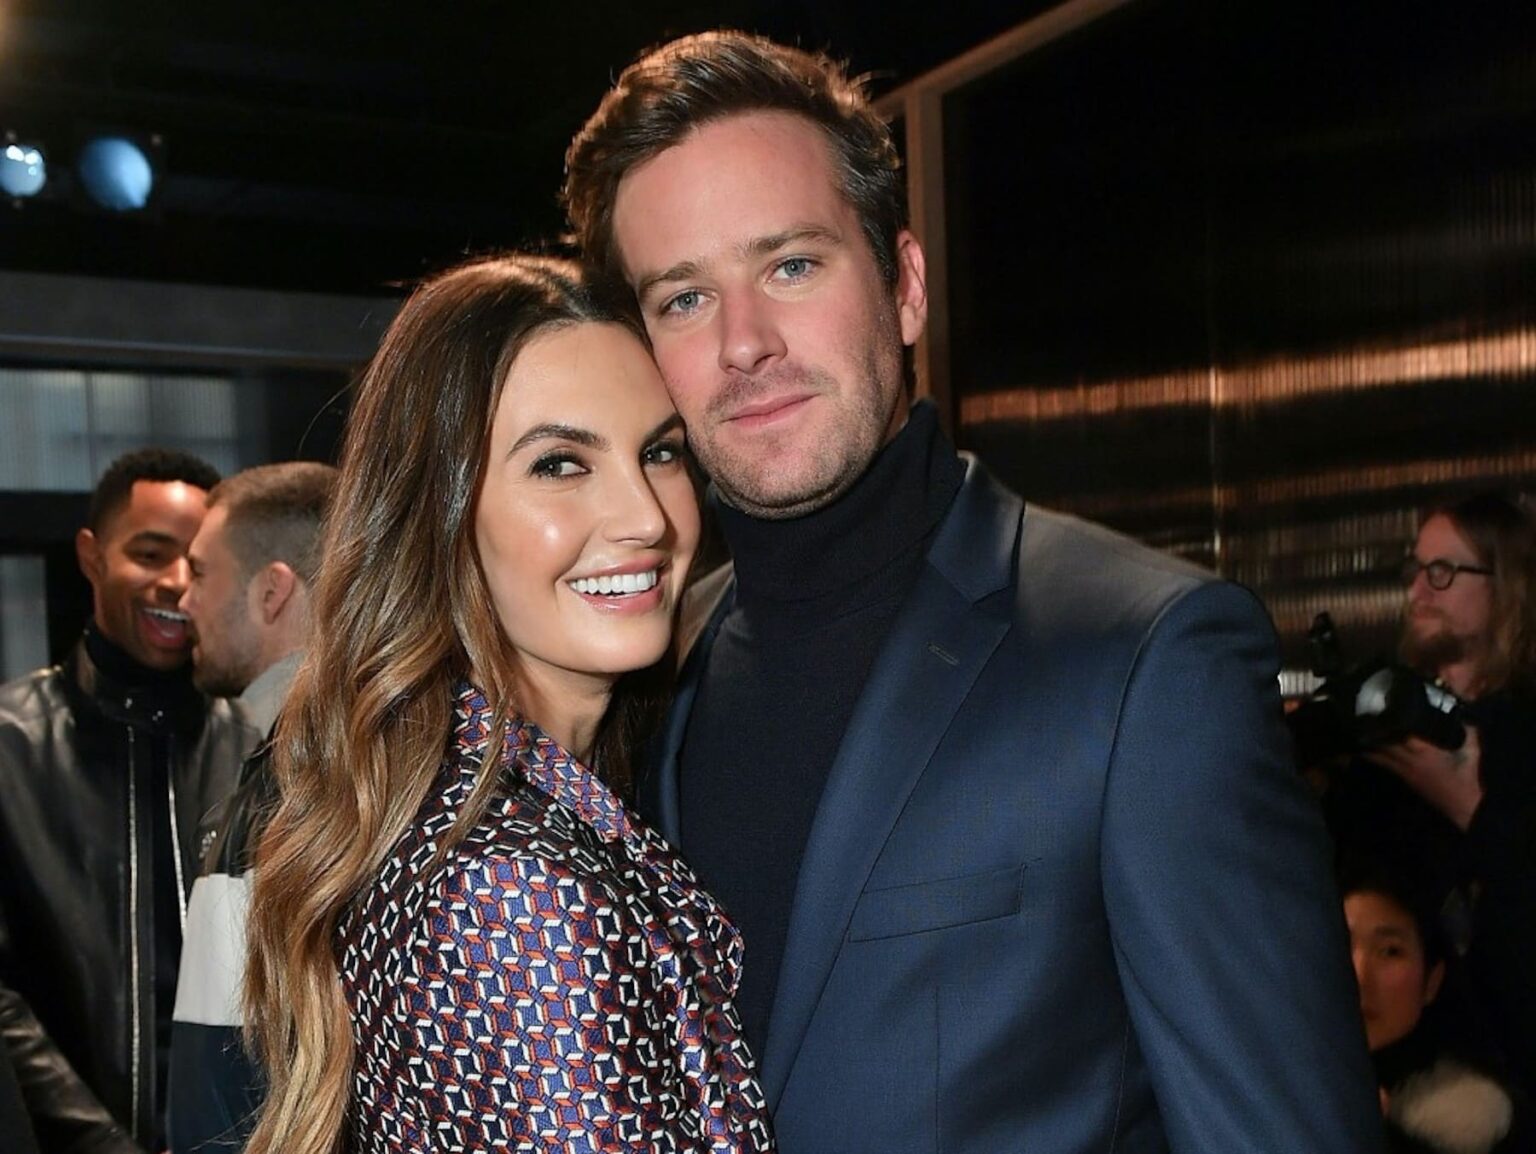 After rape claims and disturbing leaked DMs, Armie Hammer separated from his wife and went to rehab. With his treatment over, will he reunite with his wife?